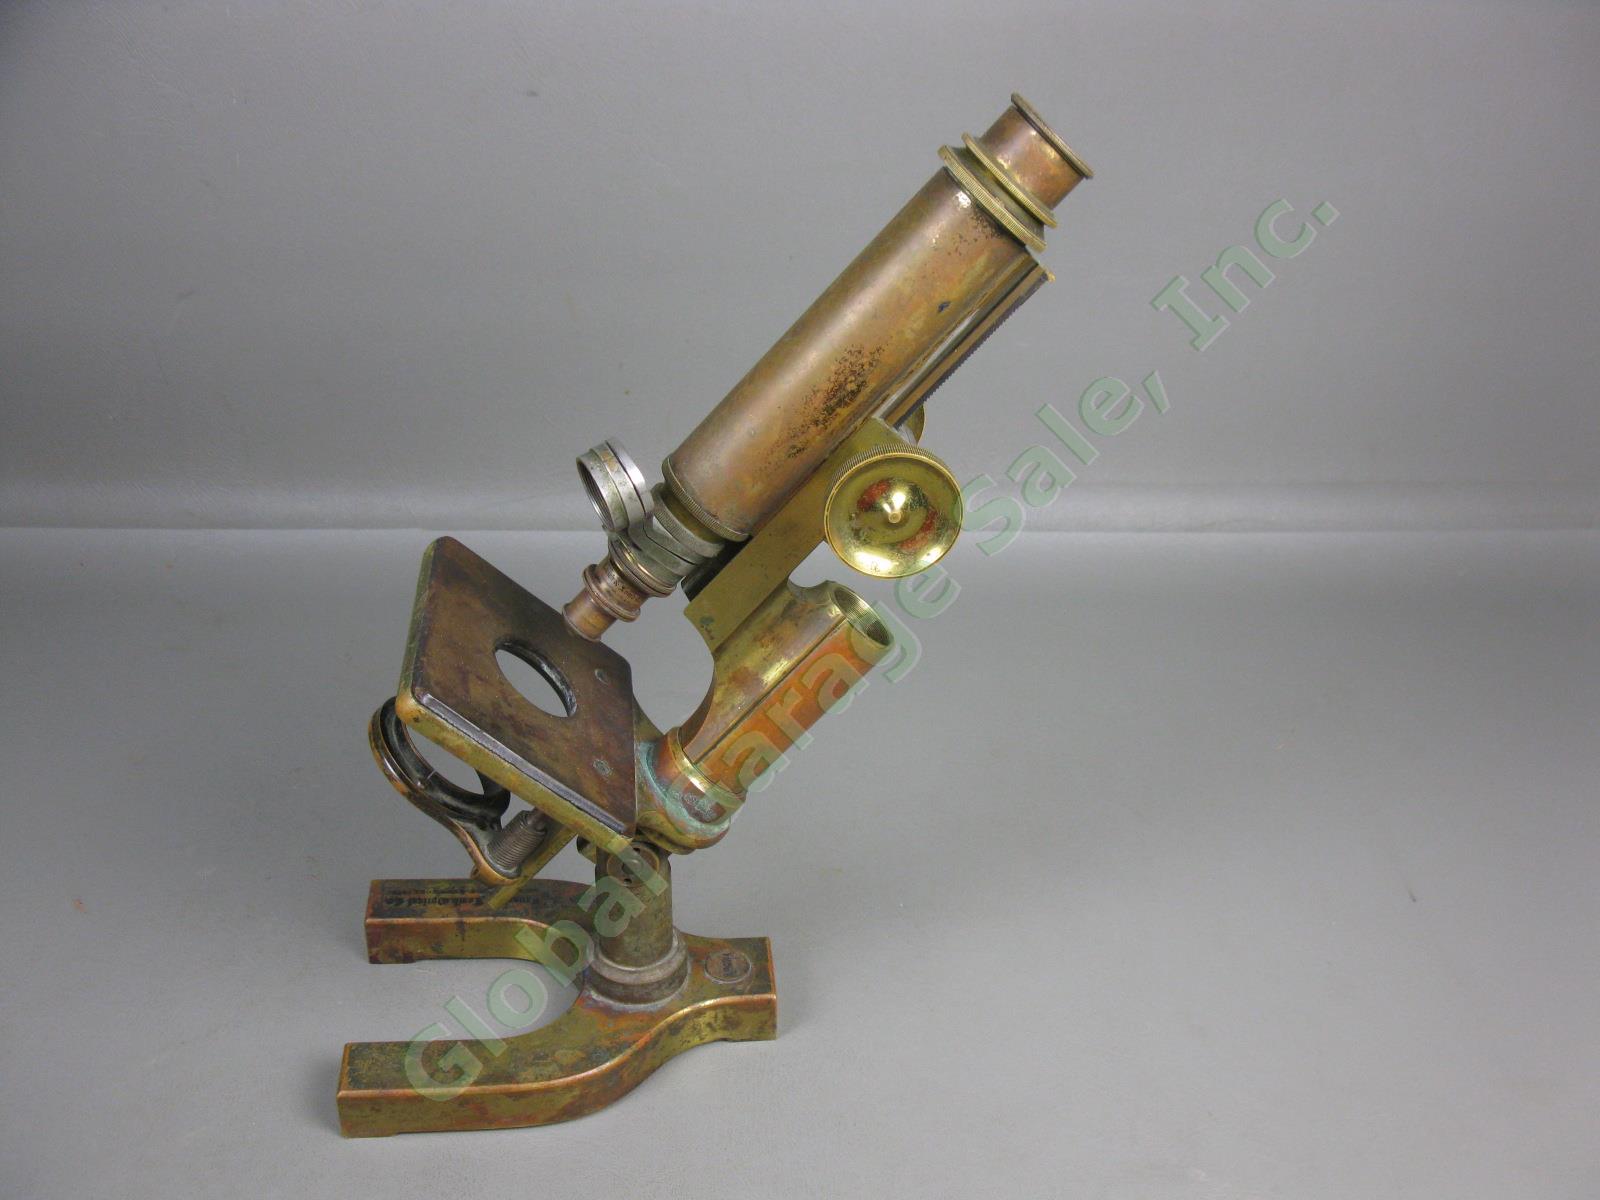 Vtg Antique 1896 Brass Bausch & Lomb Microscope 22434 Series I 1/6 .82 Objective 3